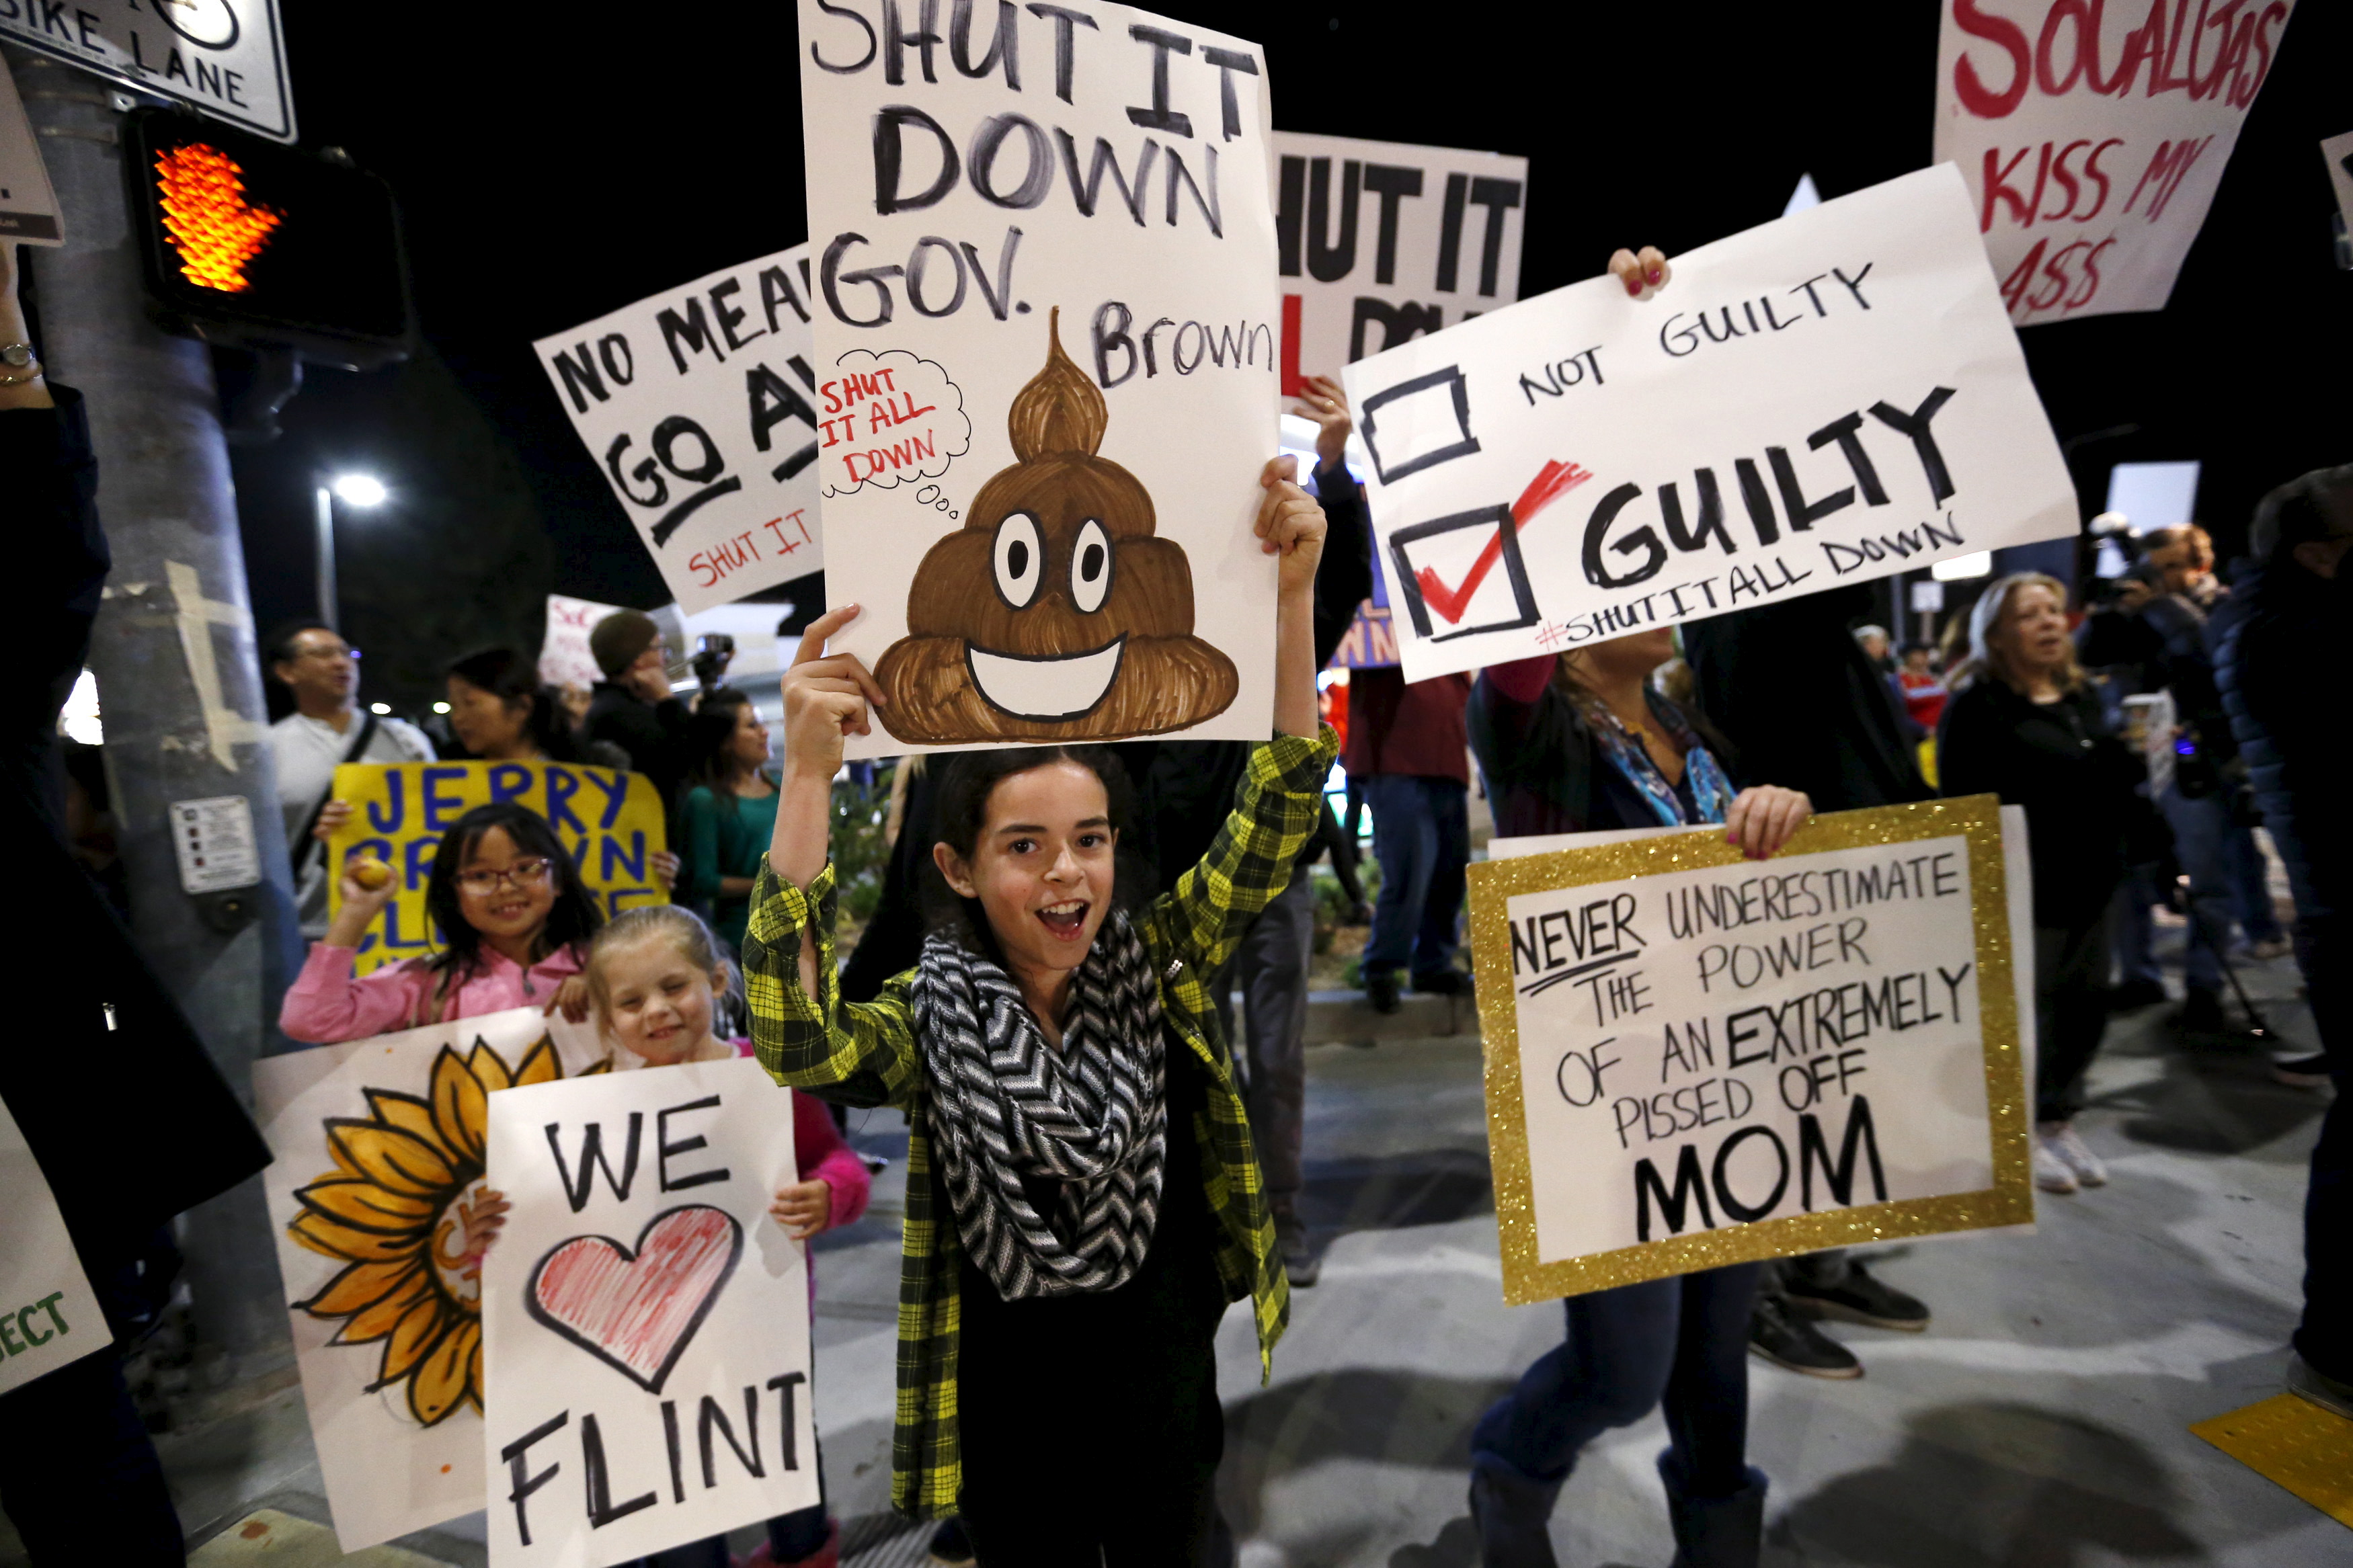 People hold signs as they rally for the permanent shut down of the Aliso Canyon natural gas storage facility near the Porter Ranch neighborhood in Los Angeles, California February 19, 2016. REUTERS/Mario Anzuoni